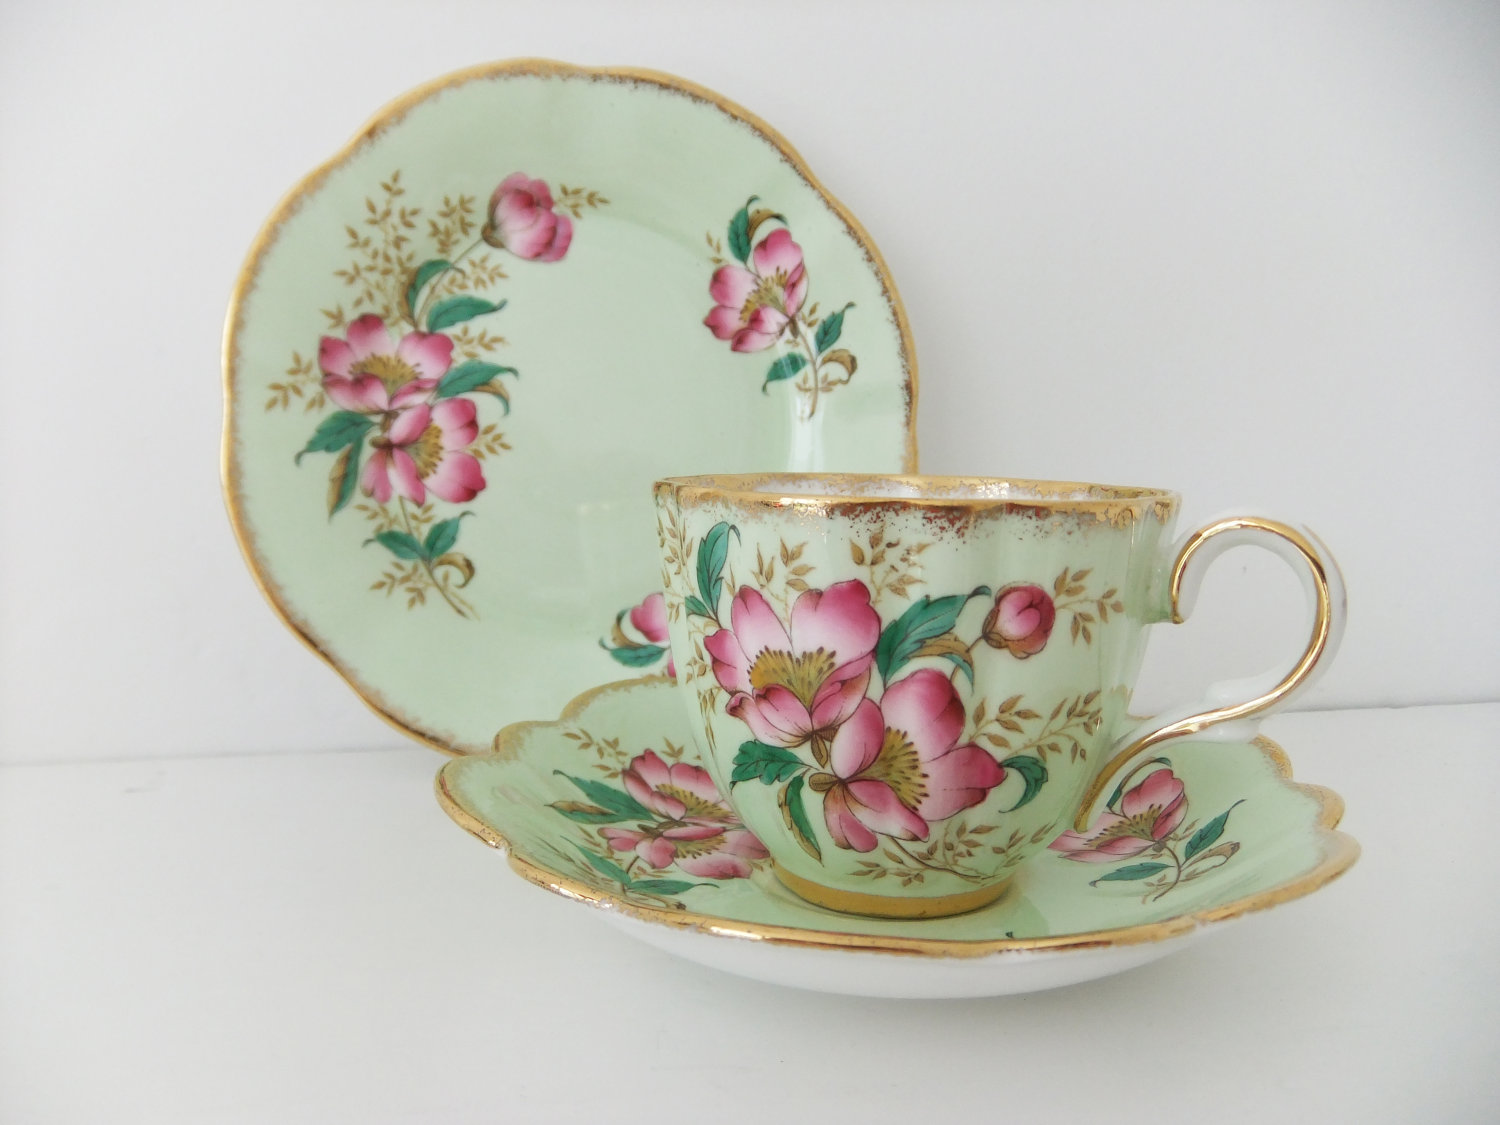 cup, cups  vintage and  China  plate mint and  green side Vintage tea  saucers Clare saucer with china